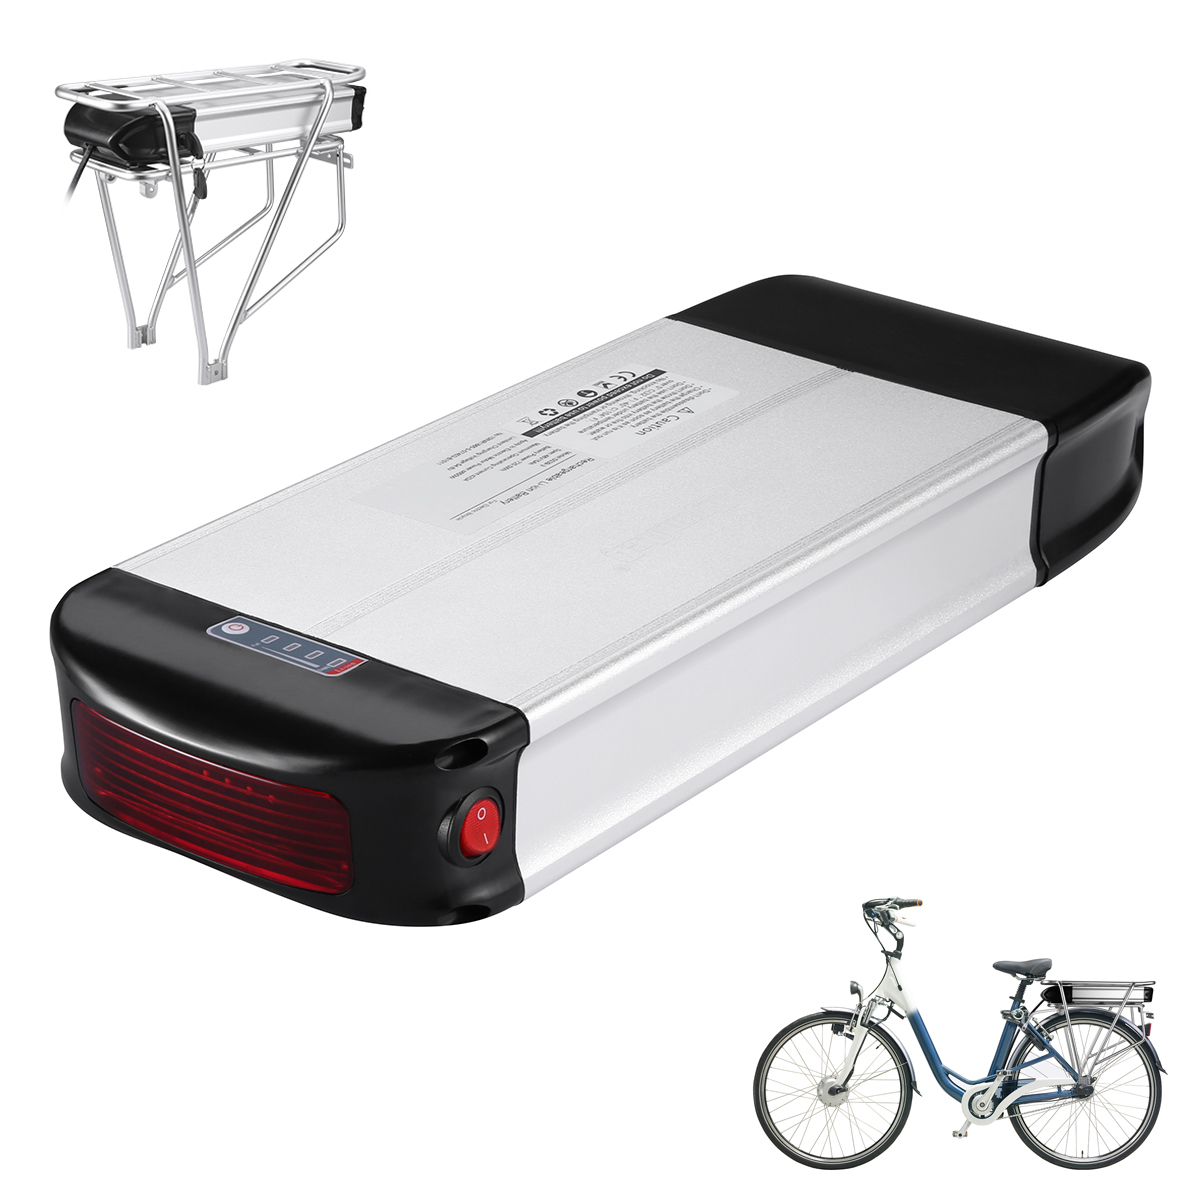 Find EU Direct HANIWINNER HA074 03 48V 15Ah 720W E bike Battery Rechargeable Lithium Li ion Battery with Rear Bike Frame Taillight for Electric Bicycle for Sale on Gipsybee.com with cryptocurrencies